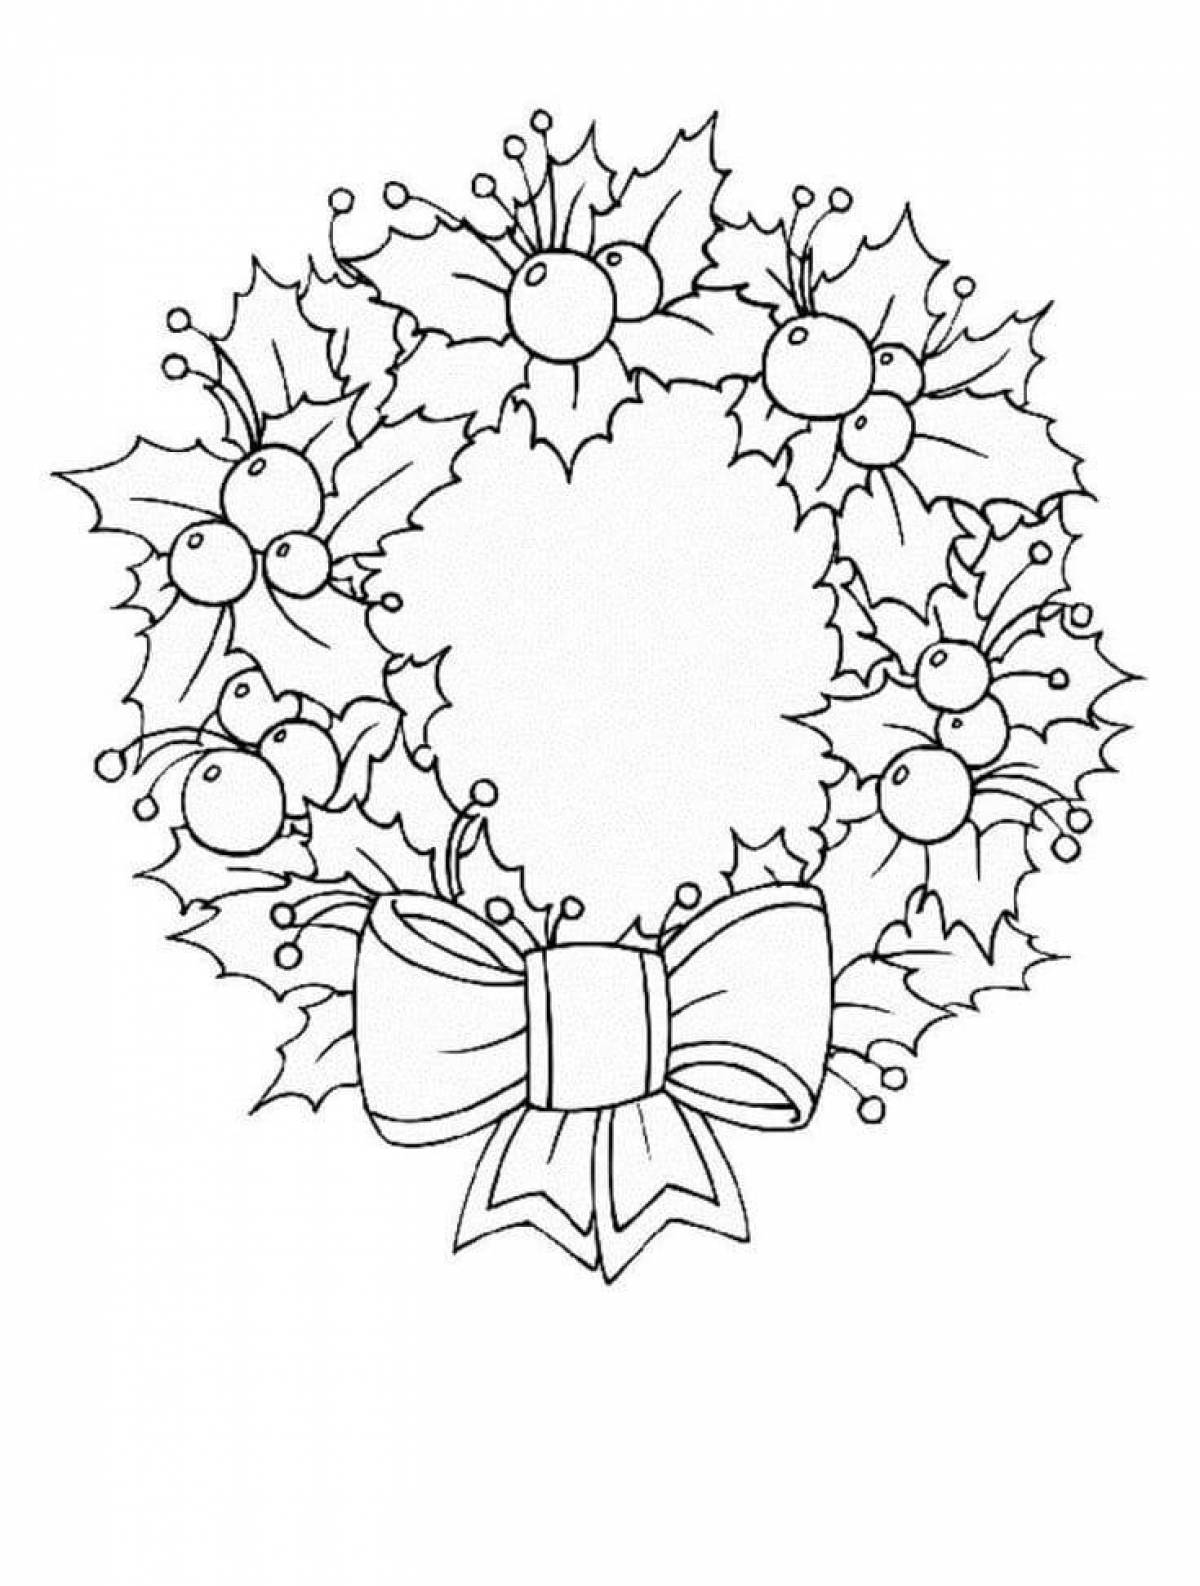 Coloring book bright Christmas wreath